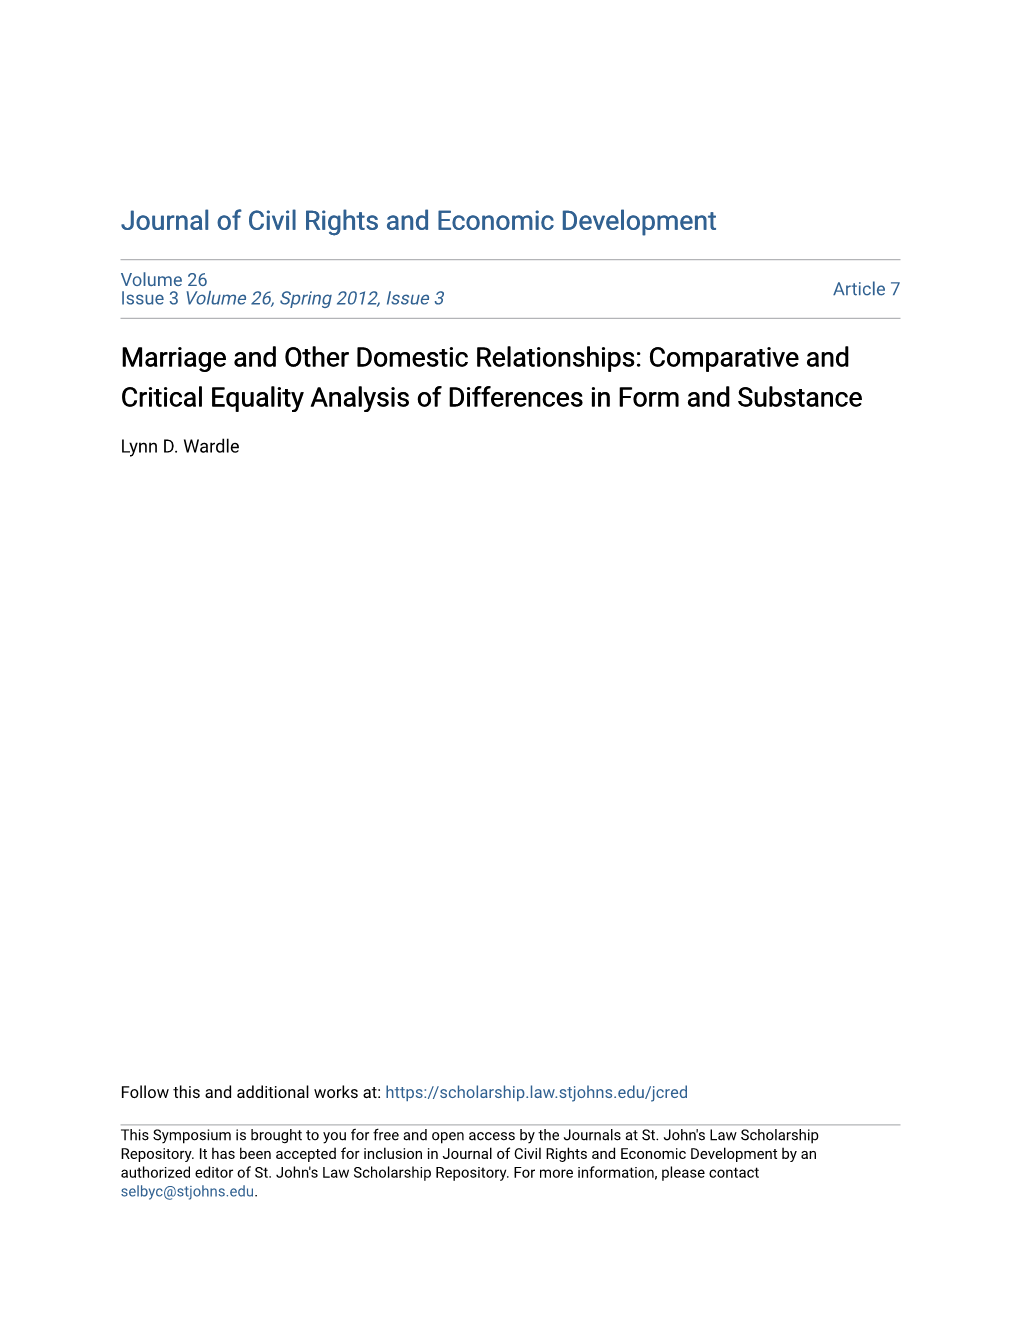 Marriage and Other Domestic Relationships: Comparative and Critical Equality Analysis of Differences in Form and Substance